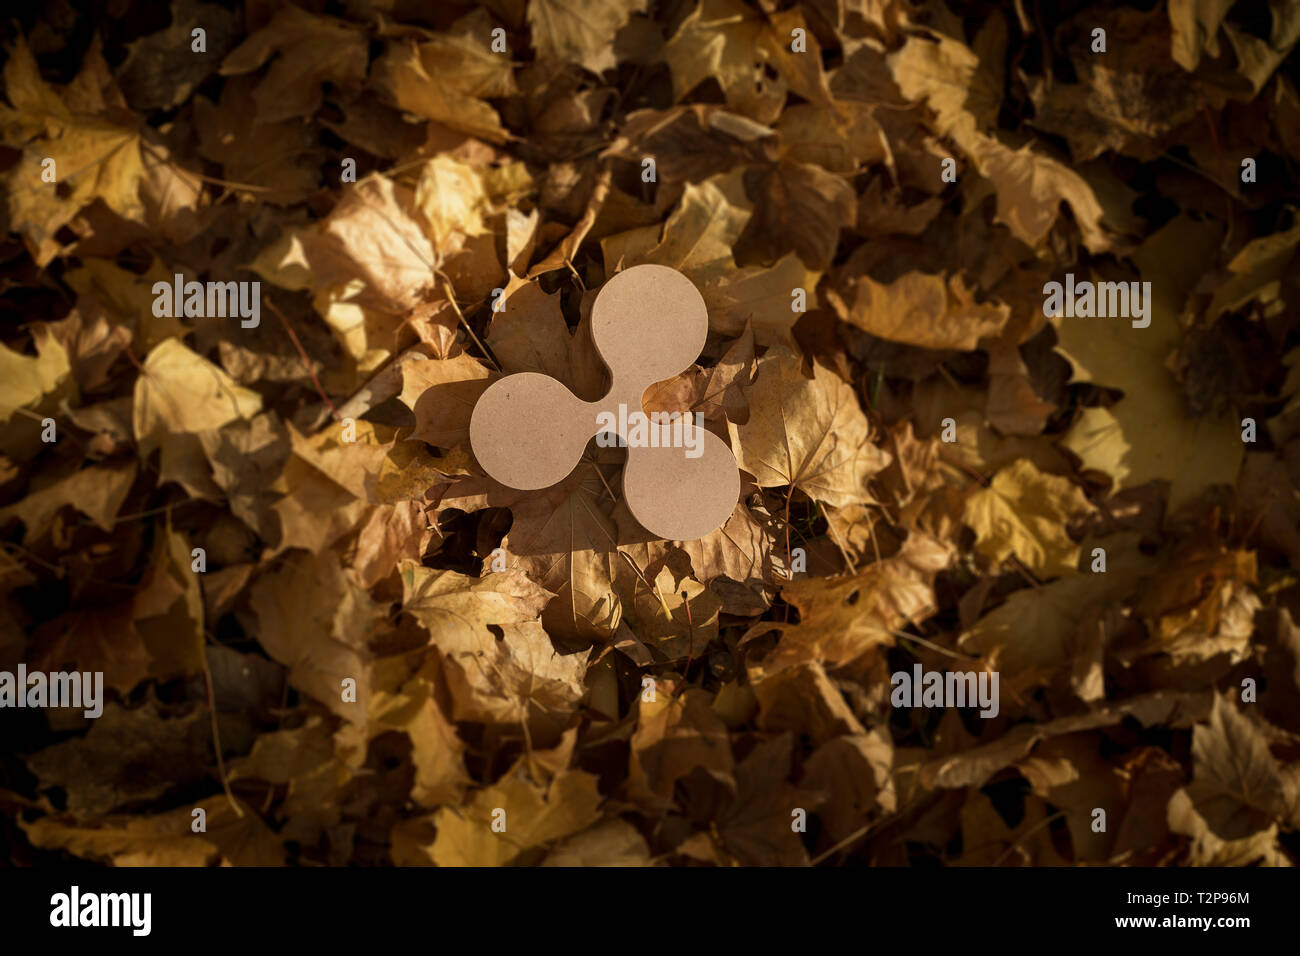 Ripple Currency Symbol on Autumn Leaves in Late evening Sun Stock Photo